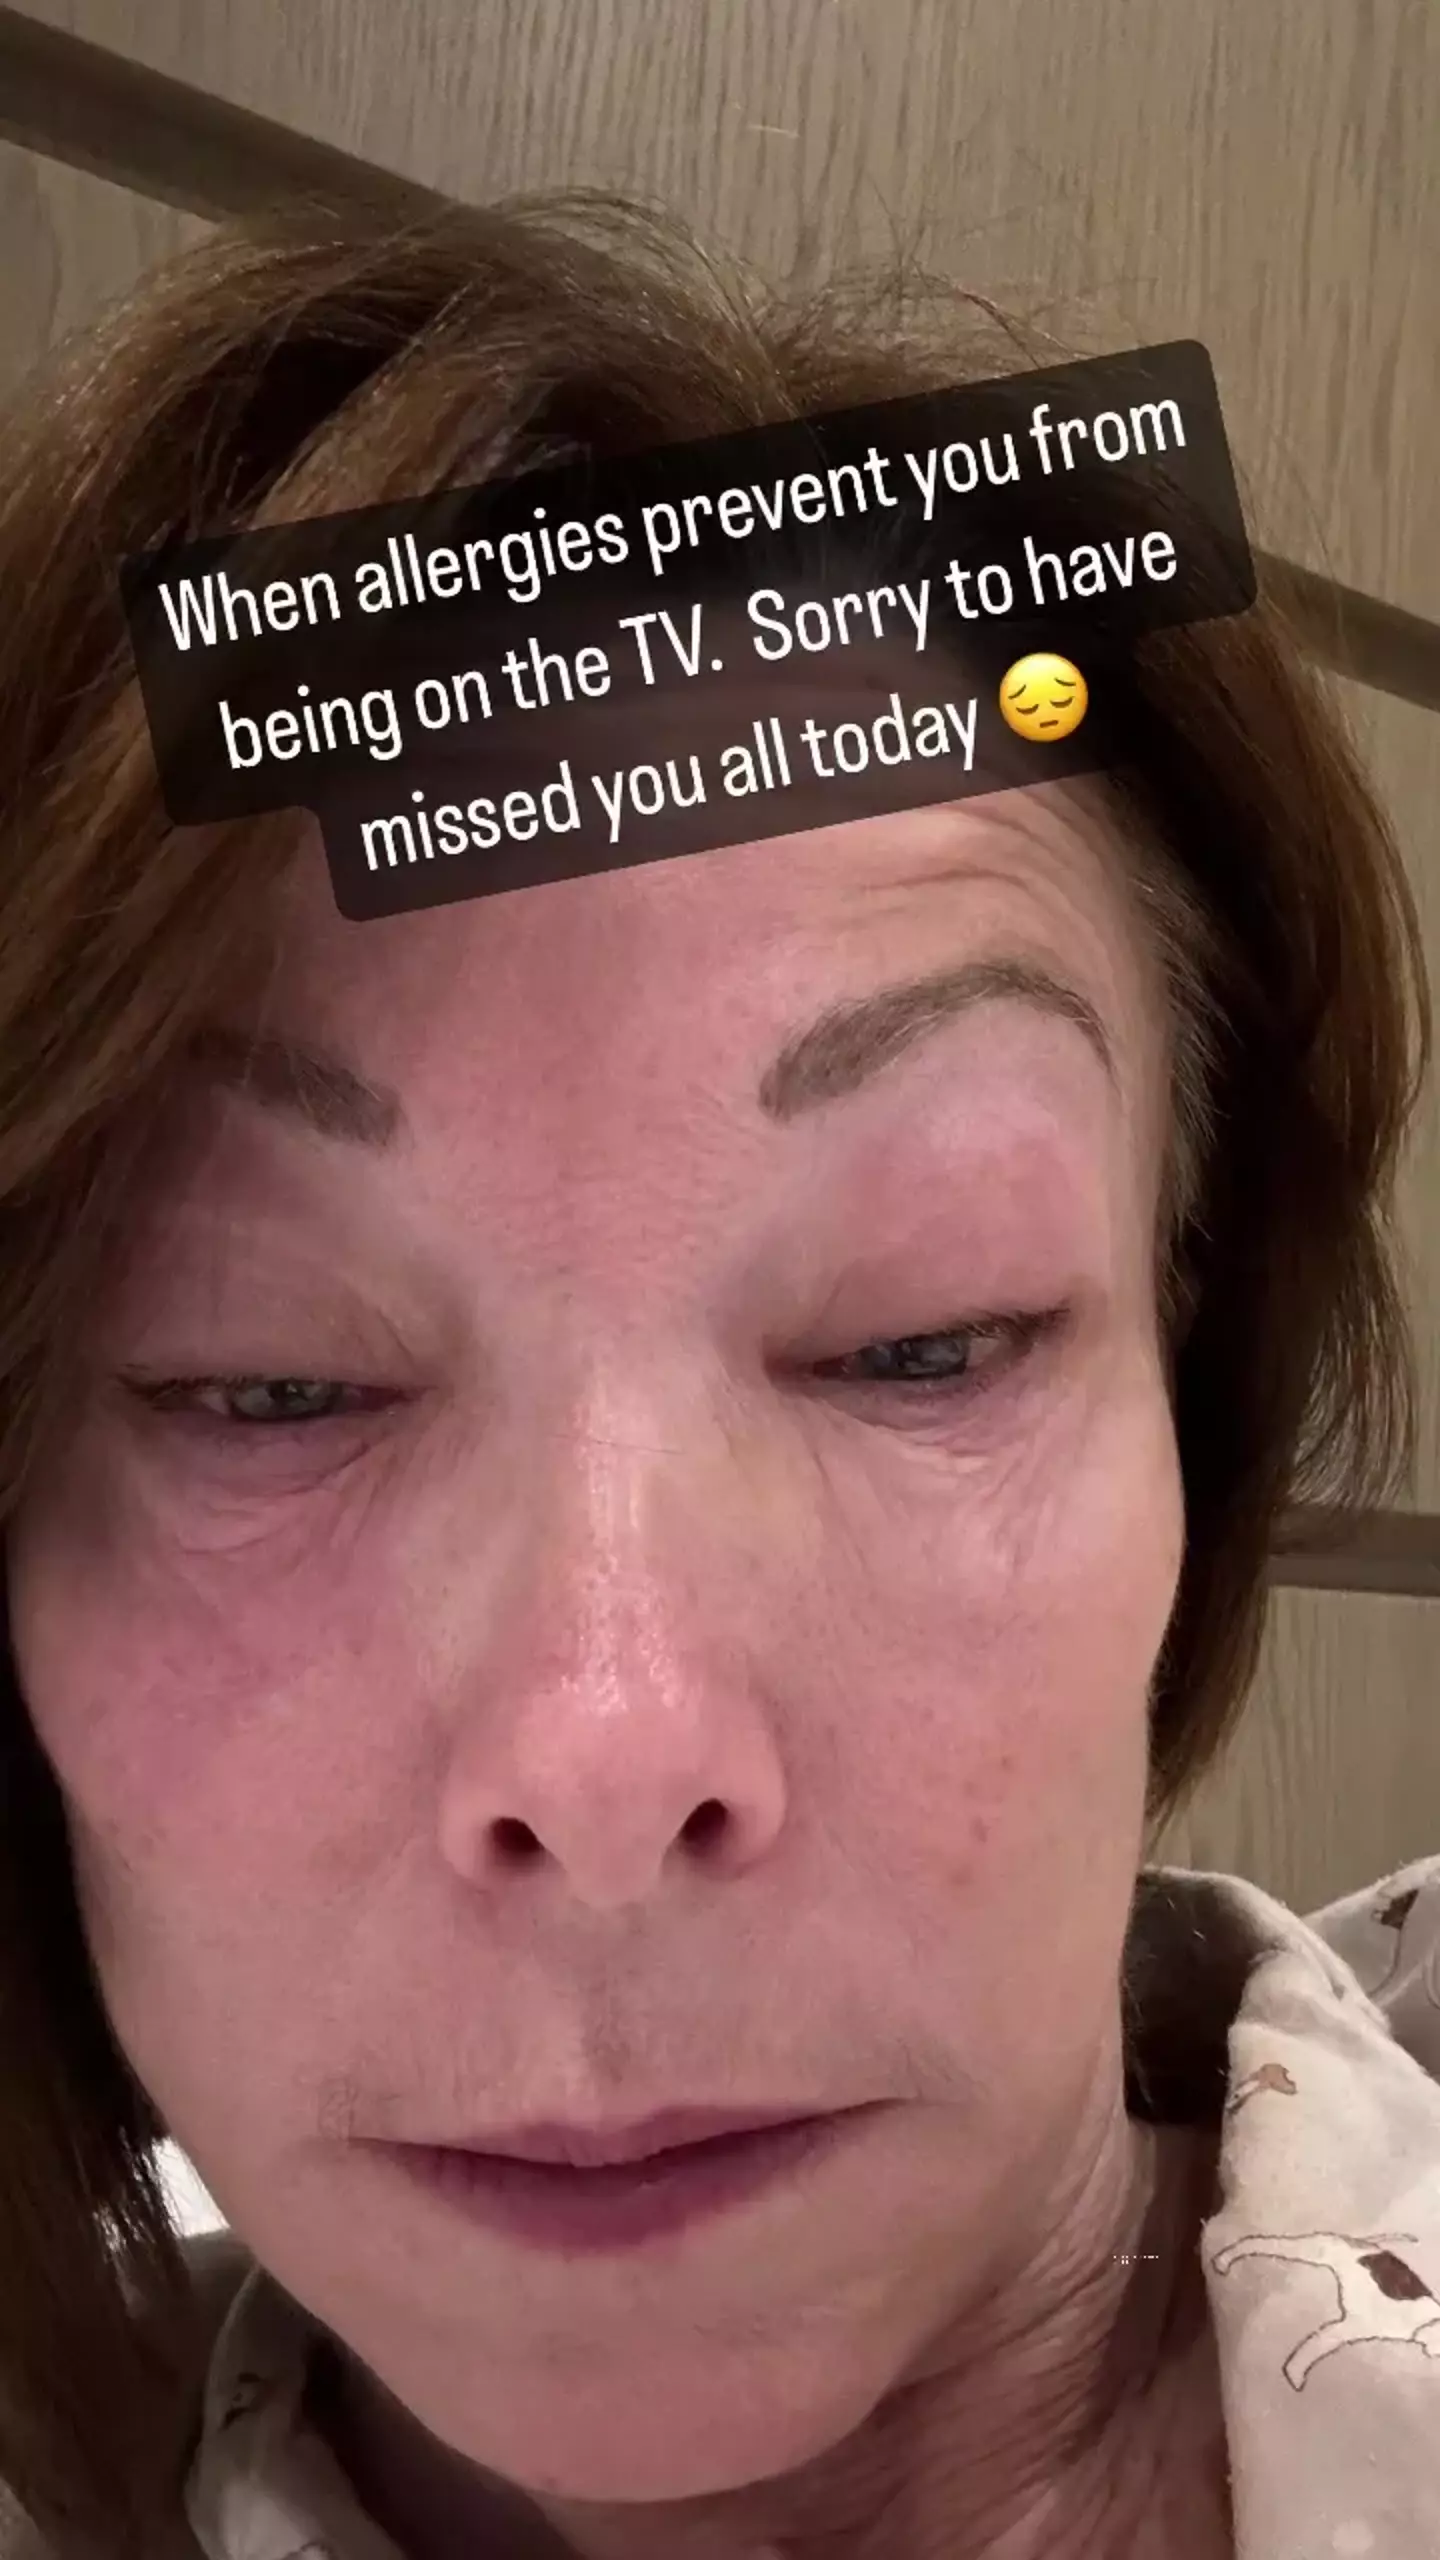 Burley shared a shocking selfie showing the result of her allergic reaction.